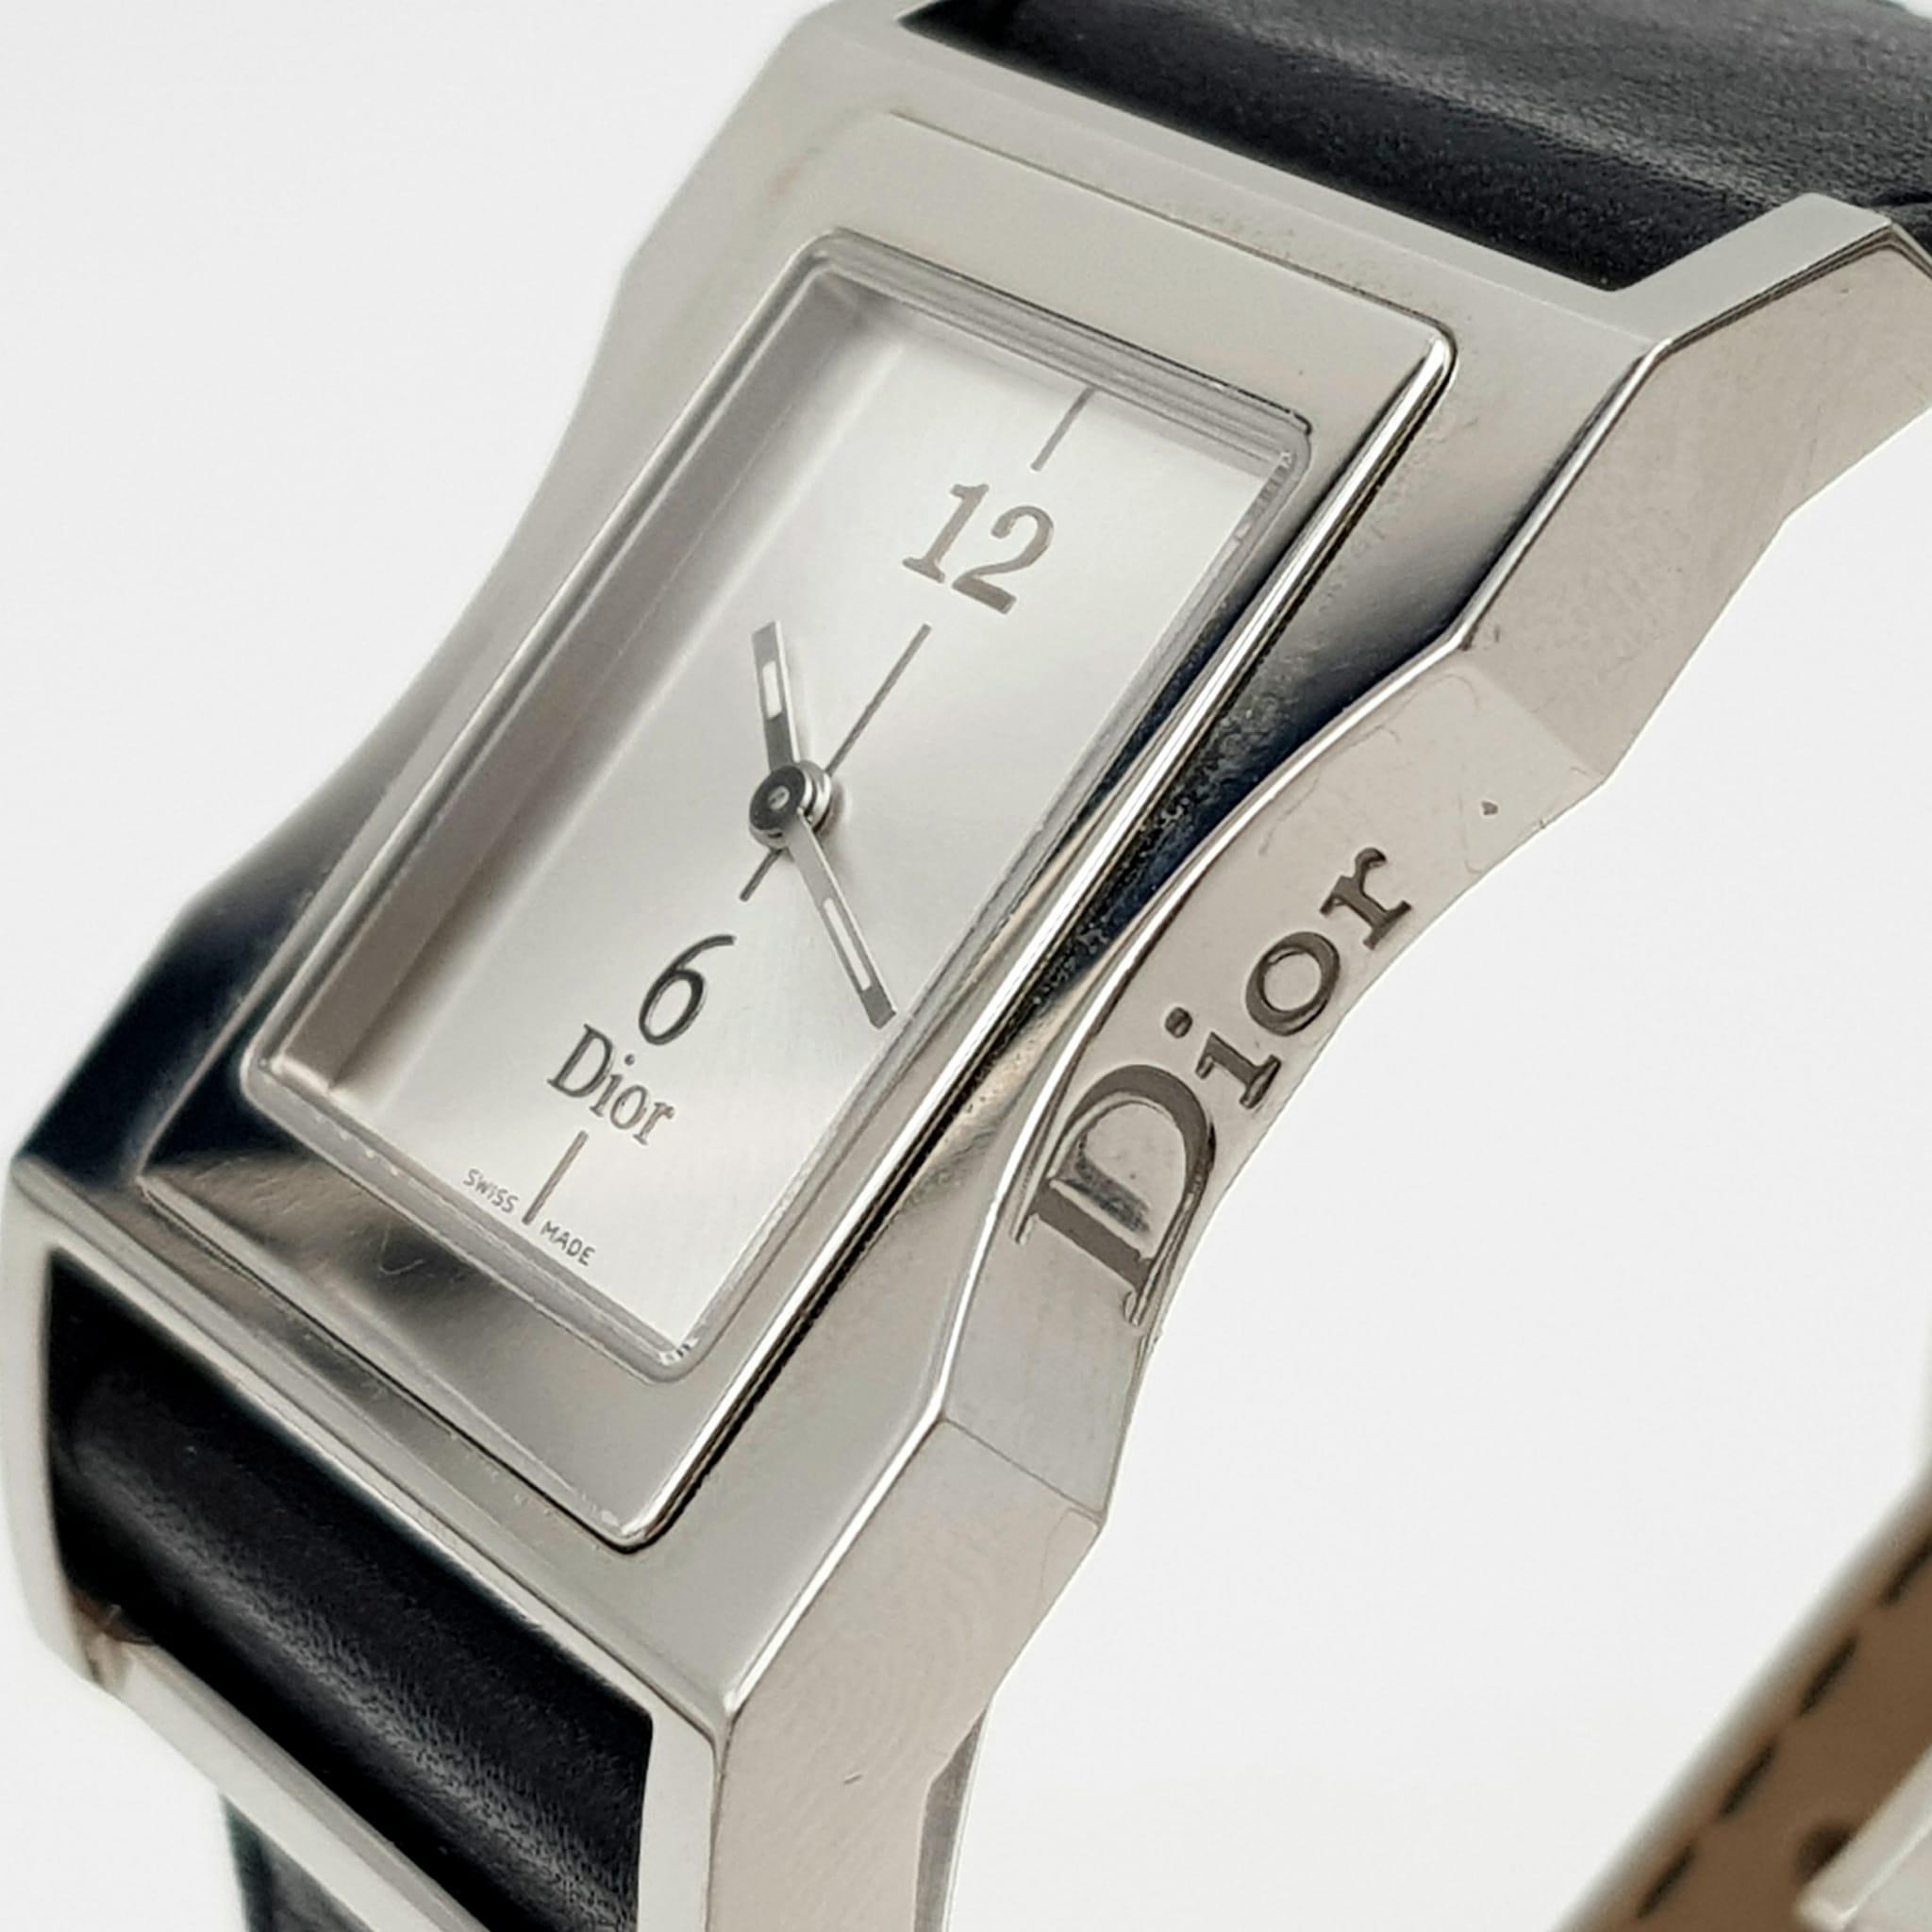 A Stylish Cristian Dior Ladies Watch. Black leather strap with stainless steel case - 30mm width. - Image 3 of 8